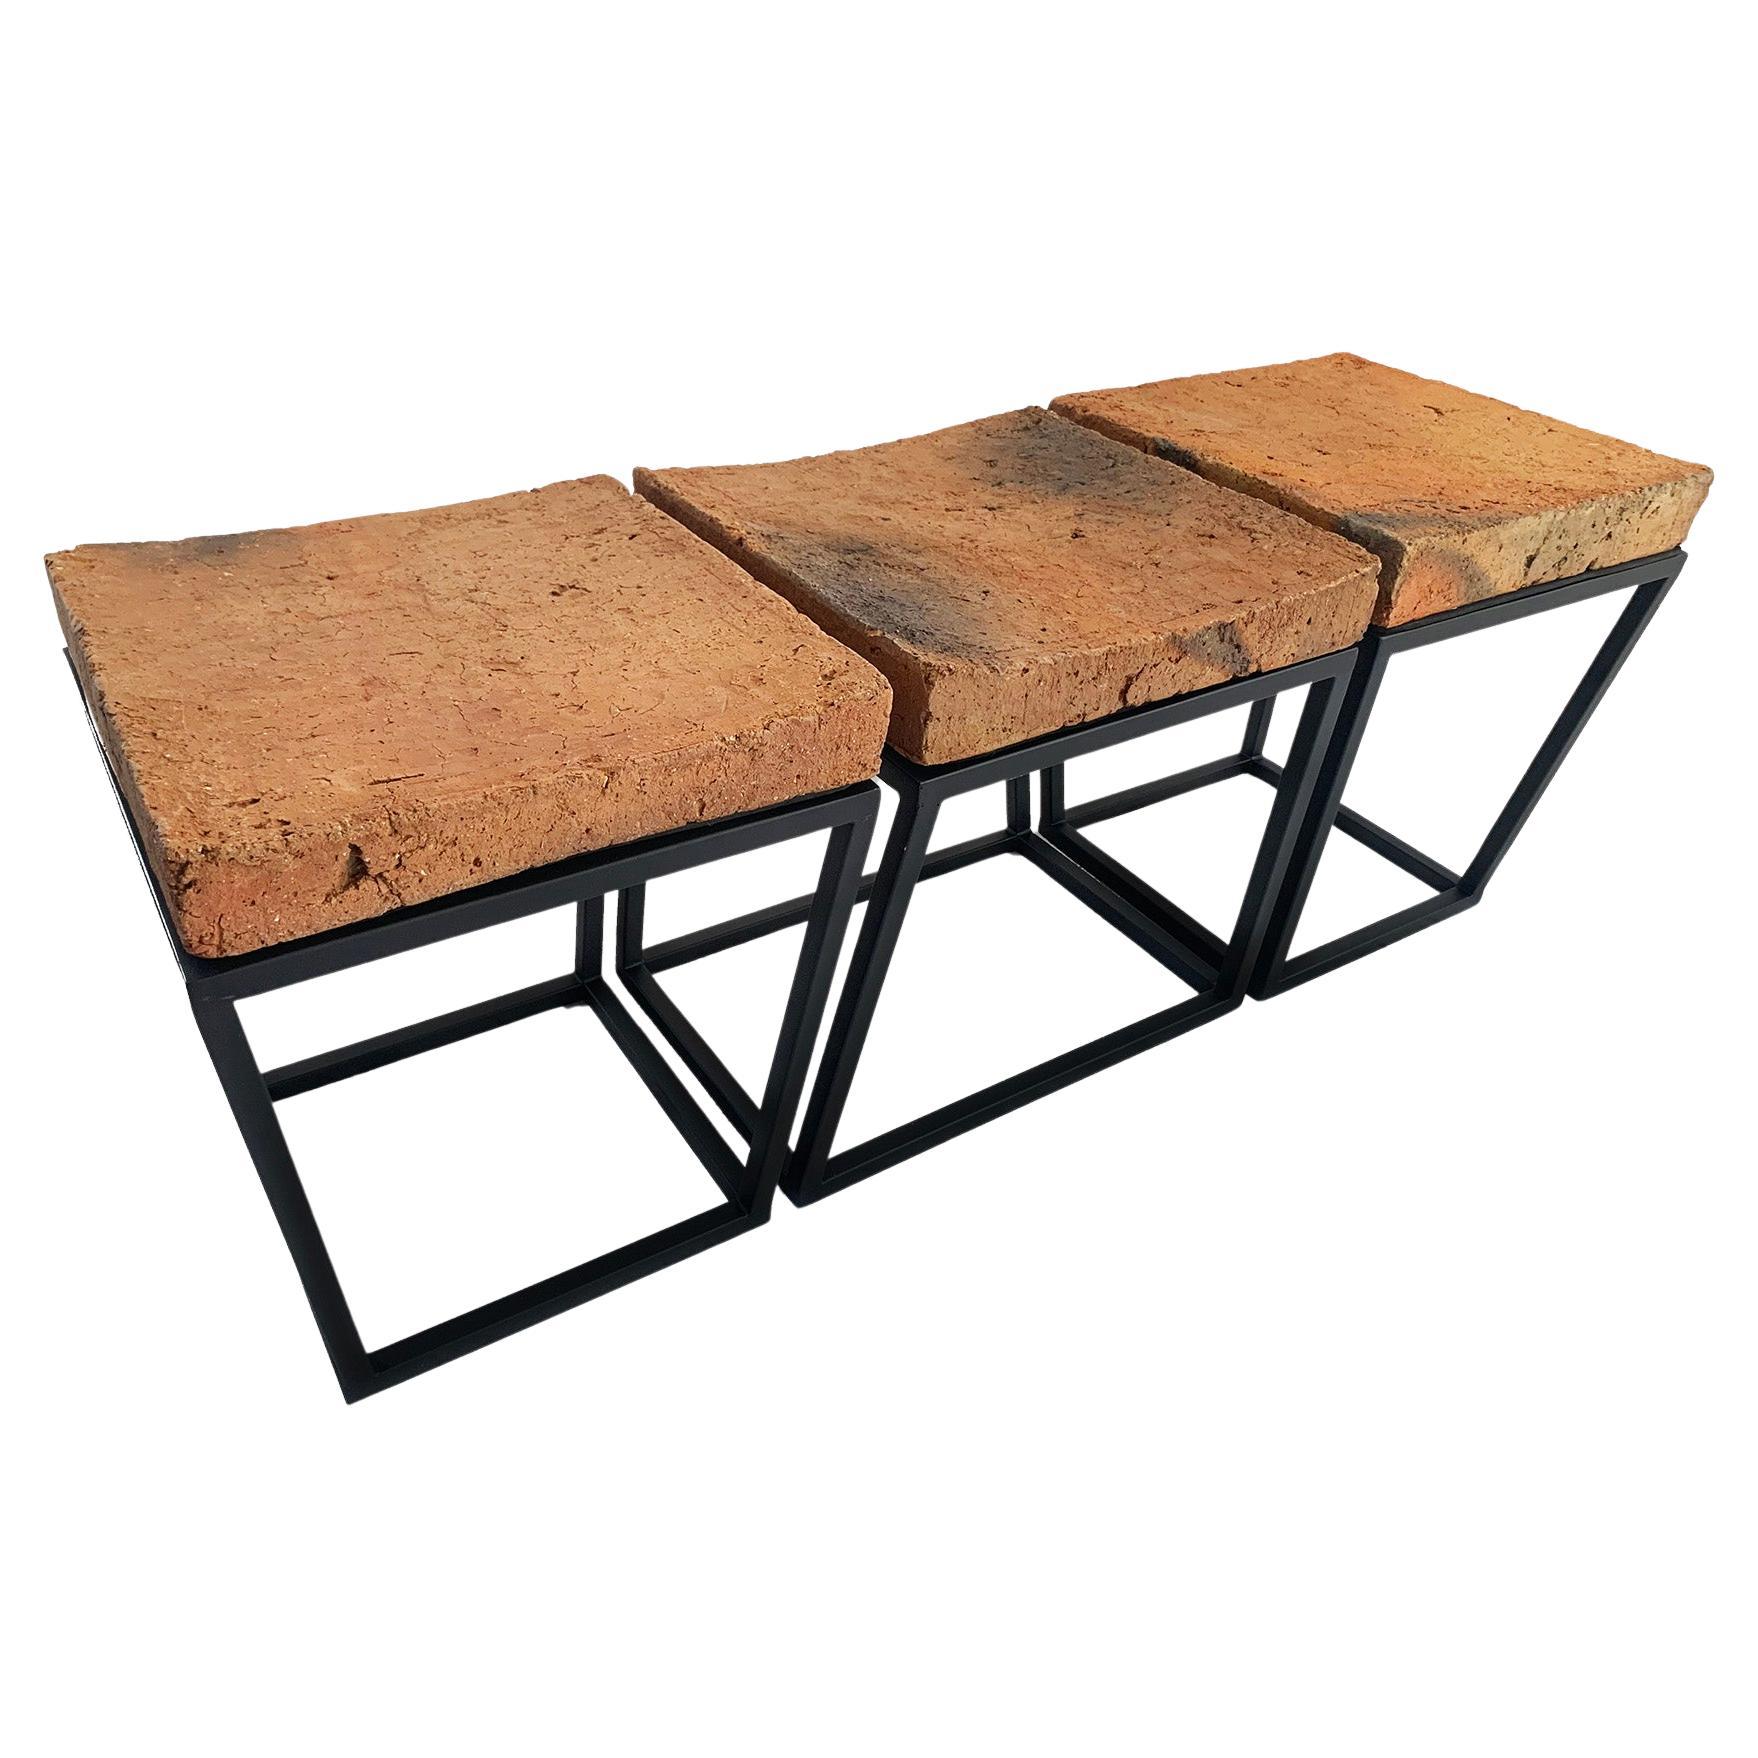 Barro Bench, Set of 3 Seats Produced in Handcrafted Ceramics For Sale